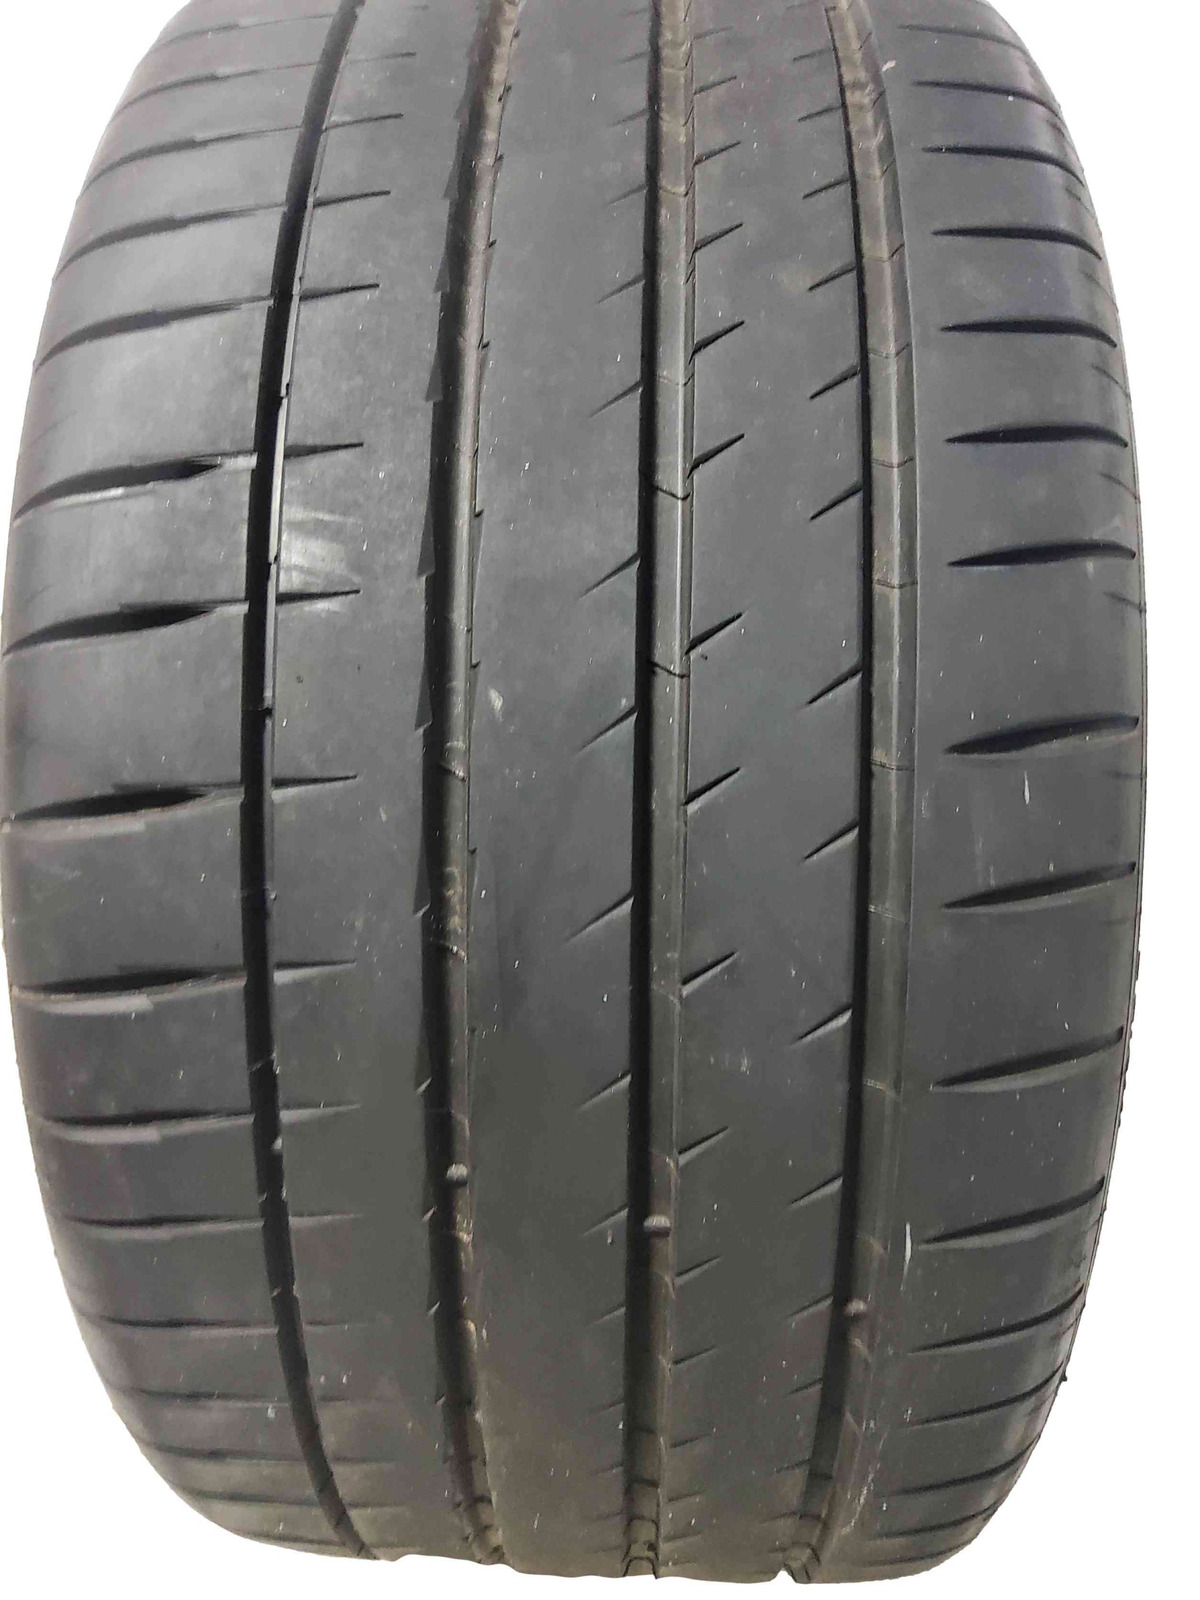 P245/35R19 Michelin Pilot Sport A/S 4 ZP 89 Y Used 8/32nds